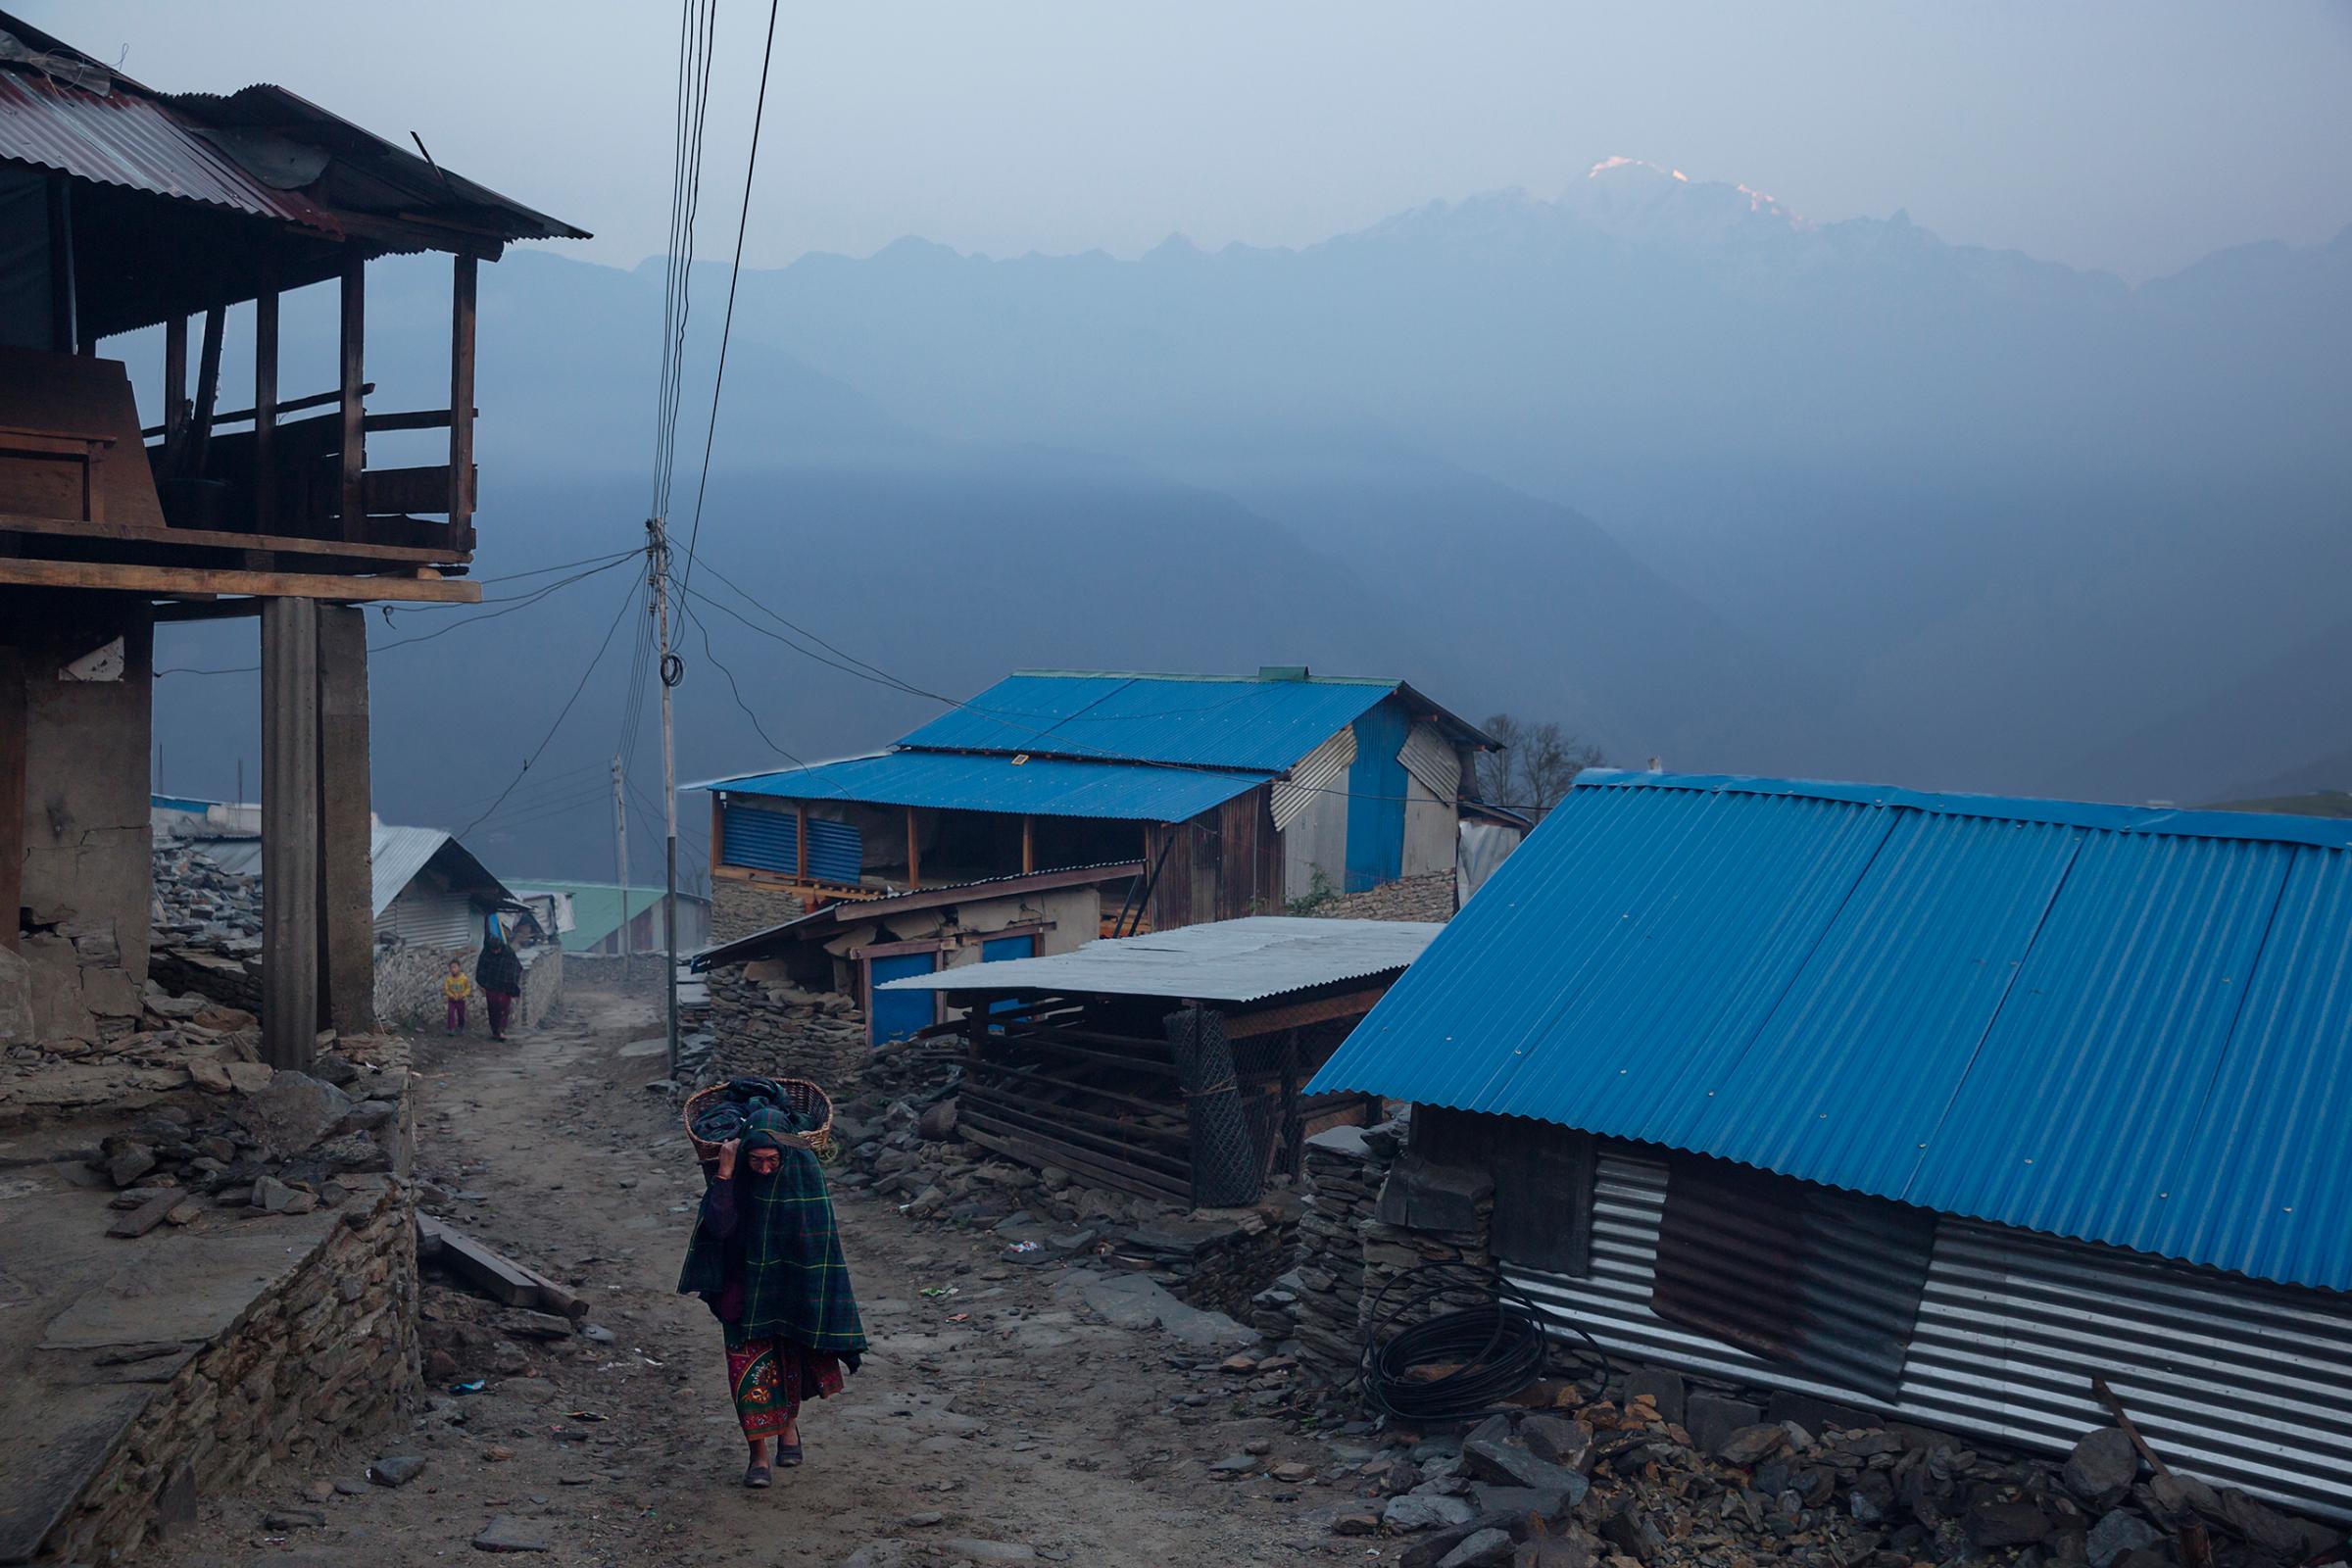 The village of Barpak, in Gorkha district, Nepal, at the epicenter of the 2015 quakes, which destroyed almost the entire village, April 5, 2016.